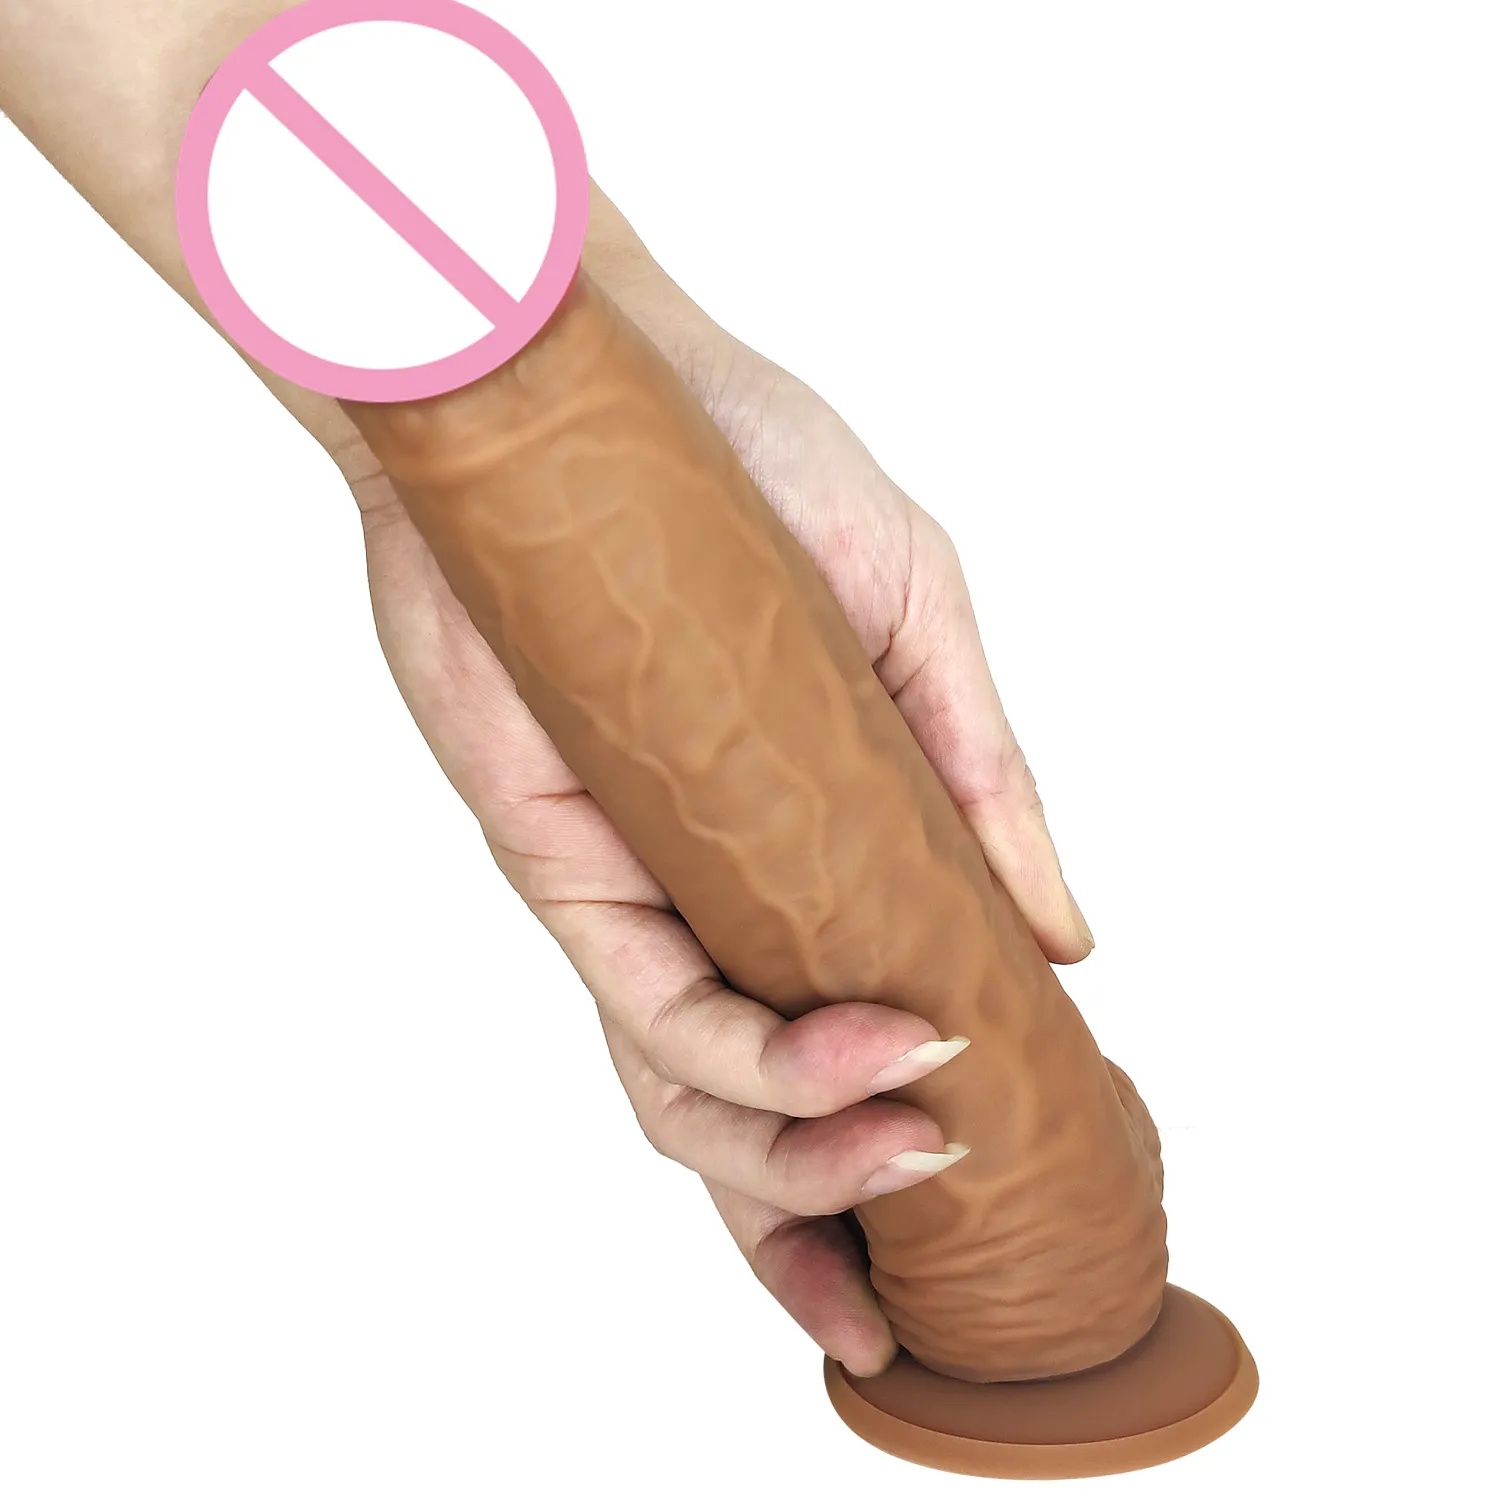 Adult Sex Toys 9.5 inch Big Dildos For Men Pussy